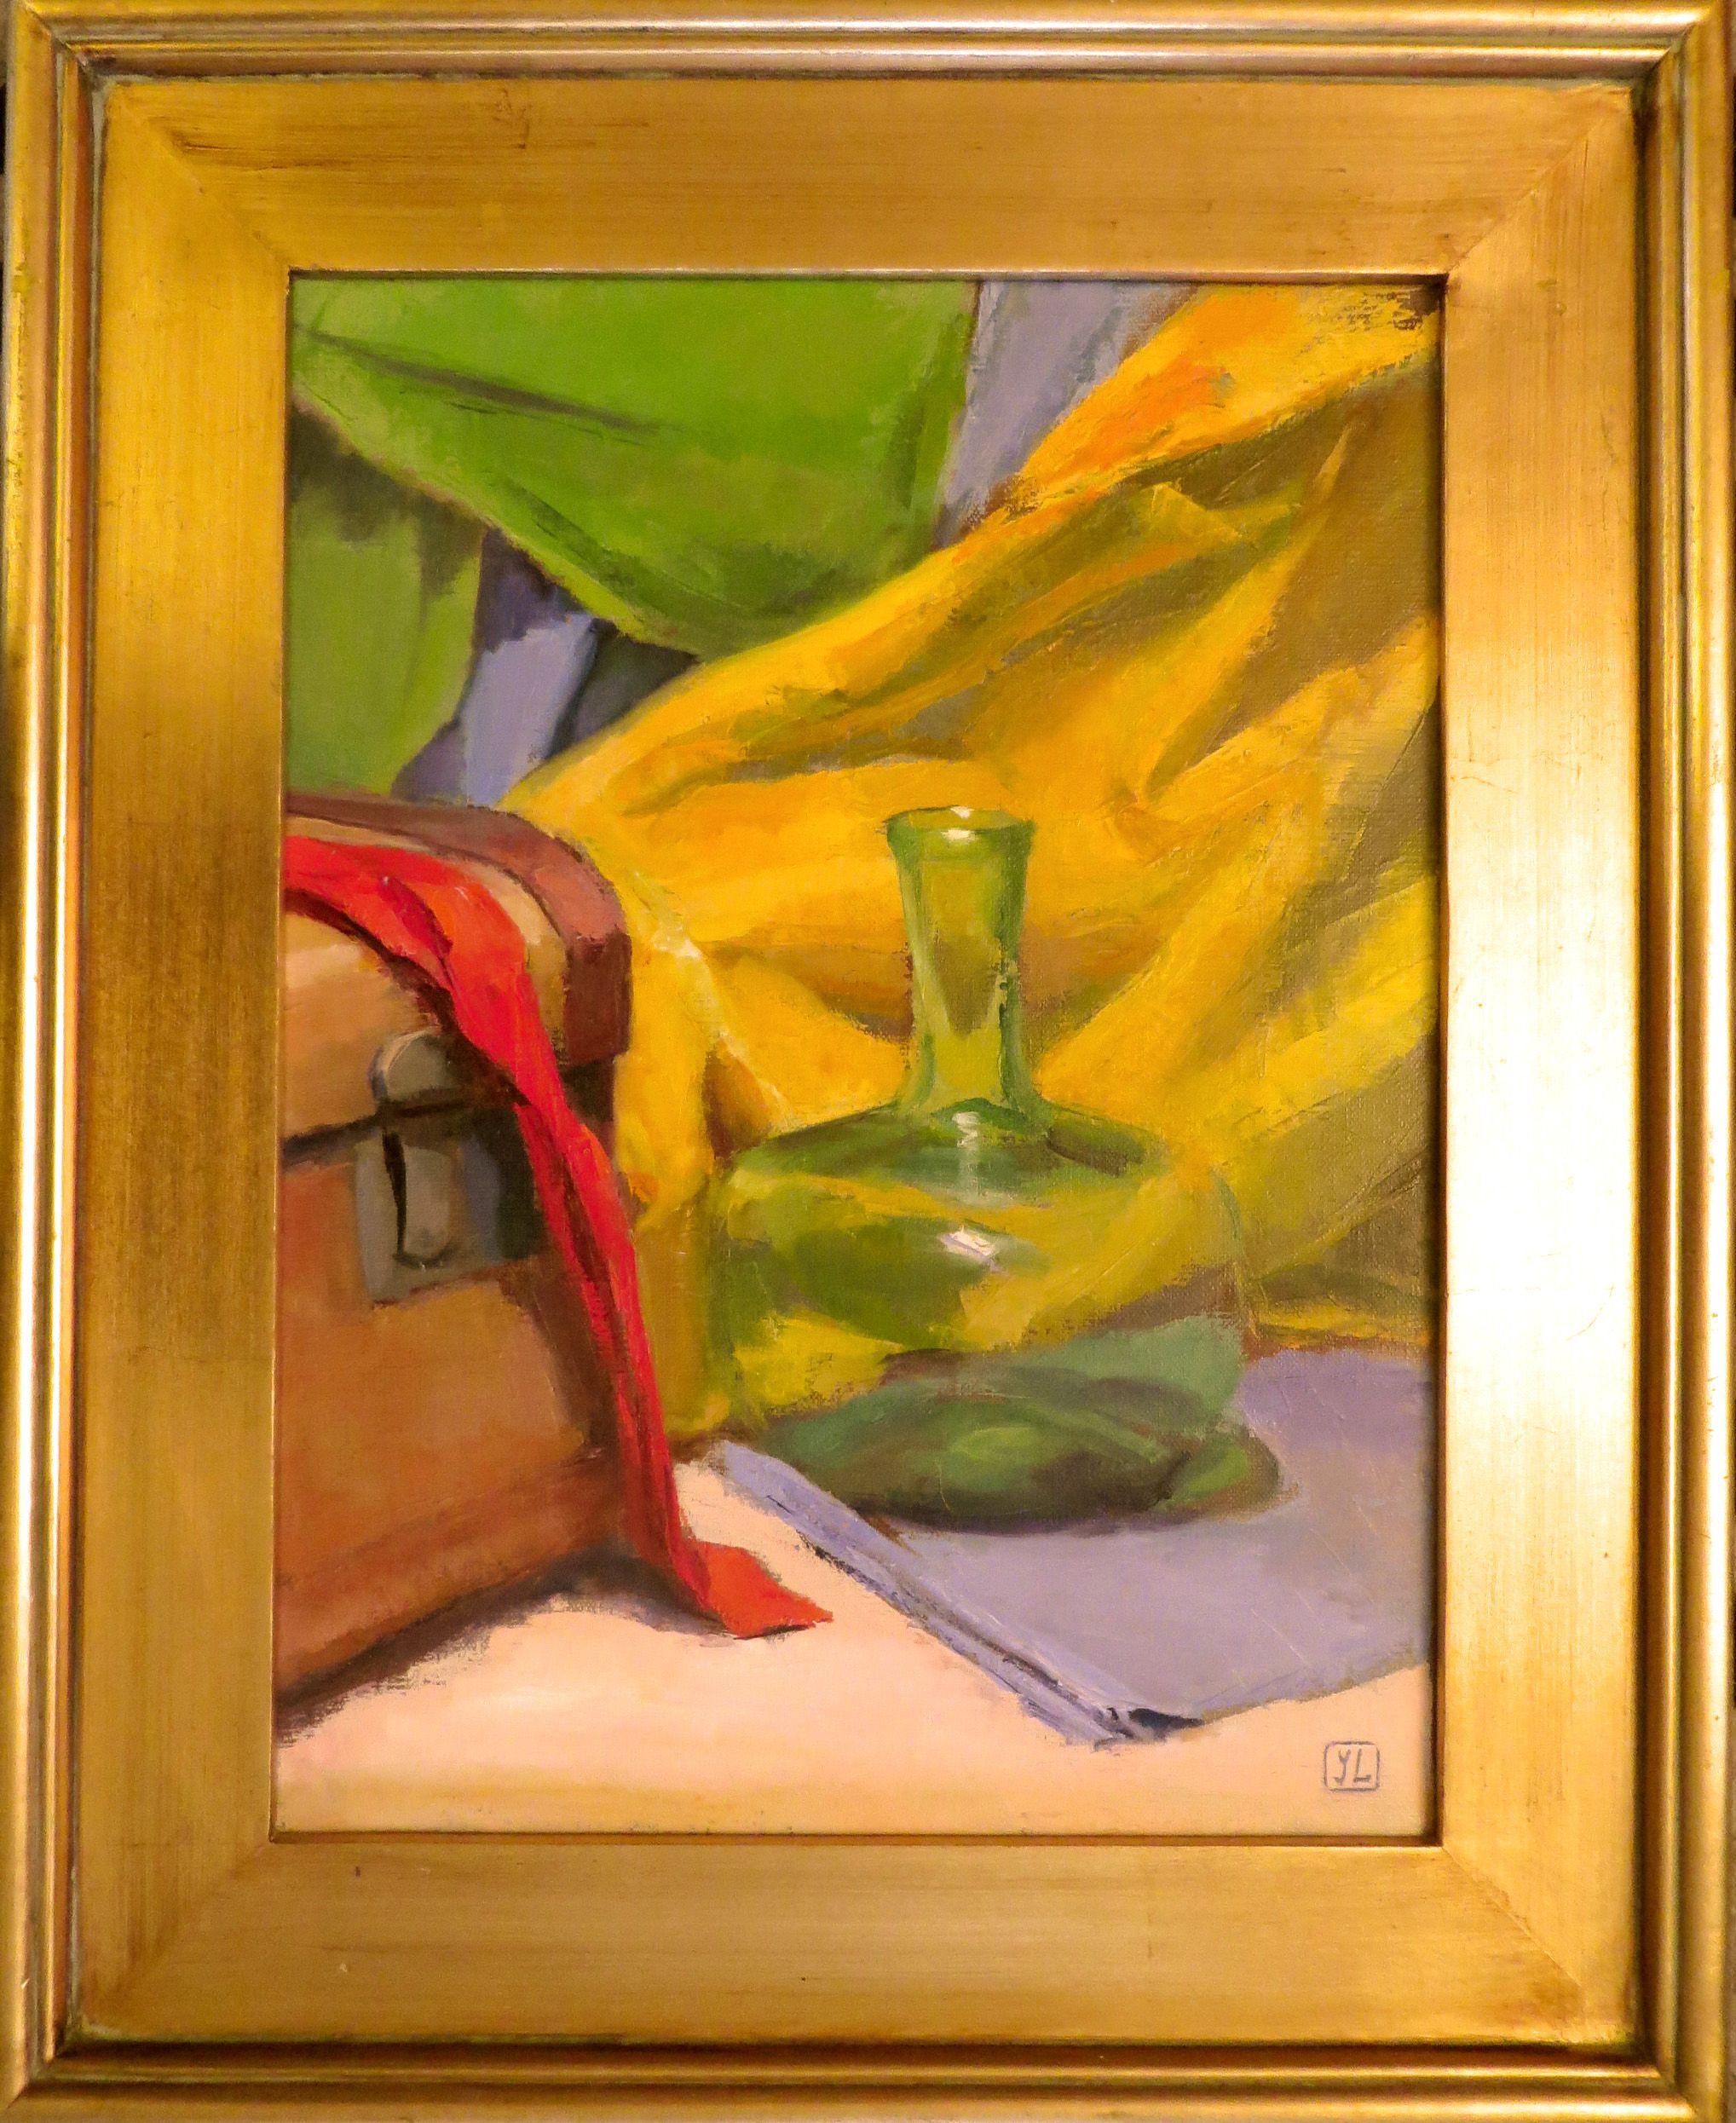 A green transparent bottle is sitting next to a leather suitcase.  This couple is surrounded by colorful fabrics - yellow, blue, green and red.  The whole composition of 'Green Bottle' is suffused in strong light which helps to emphasize the